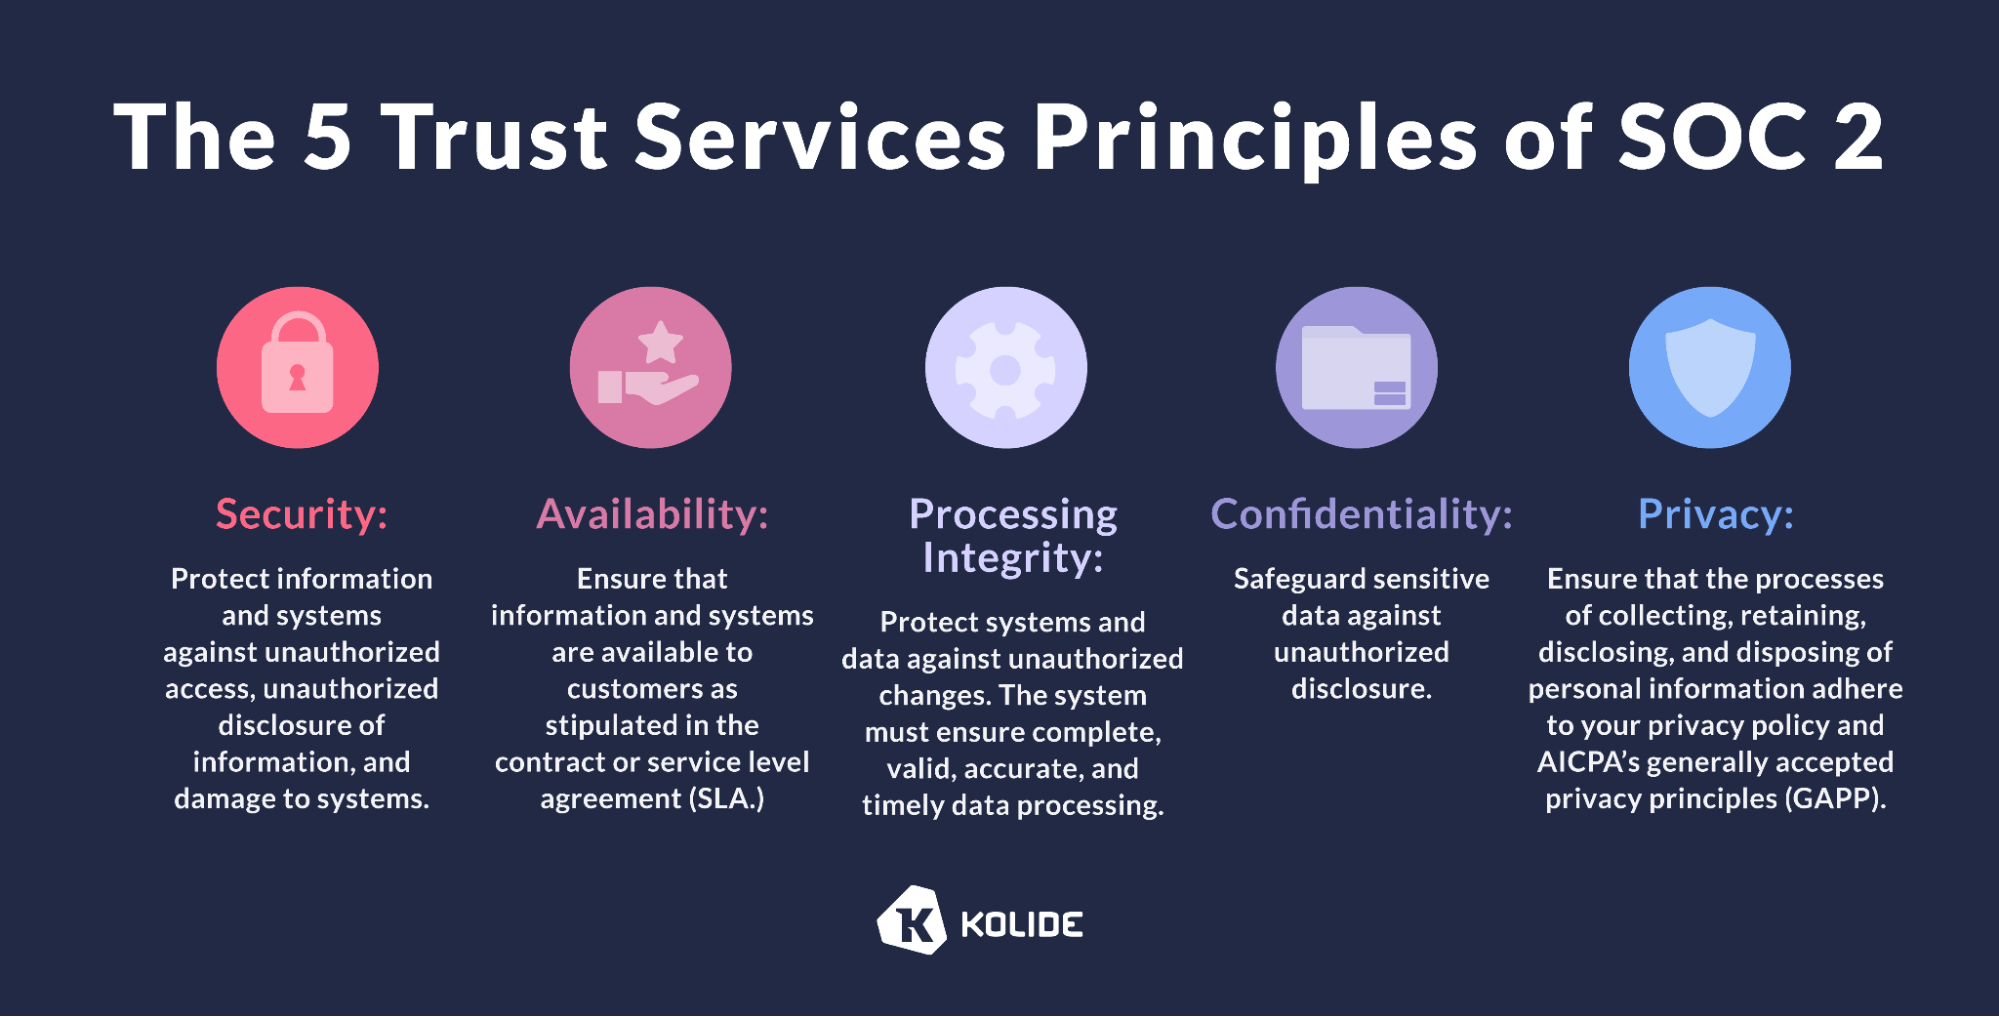 a graphic of the 5 trust principles of SOC 2: security, availability, processing integrity, confidentiality, privacy